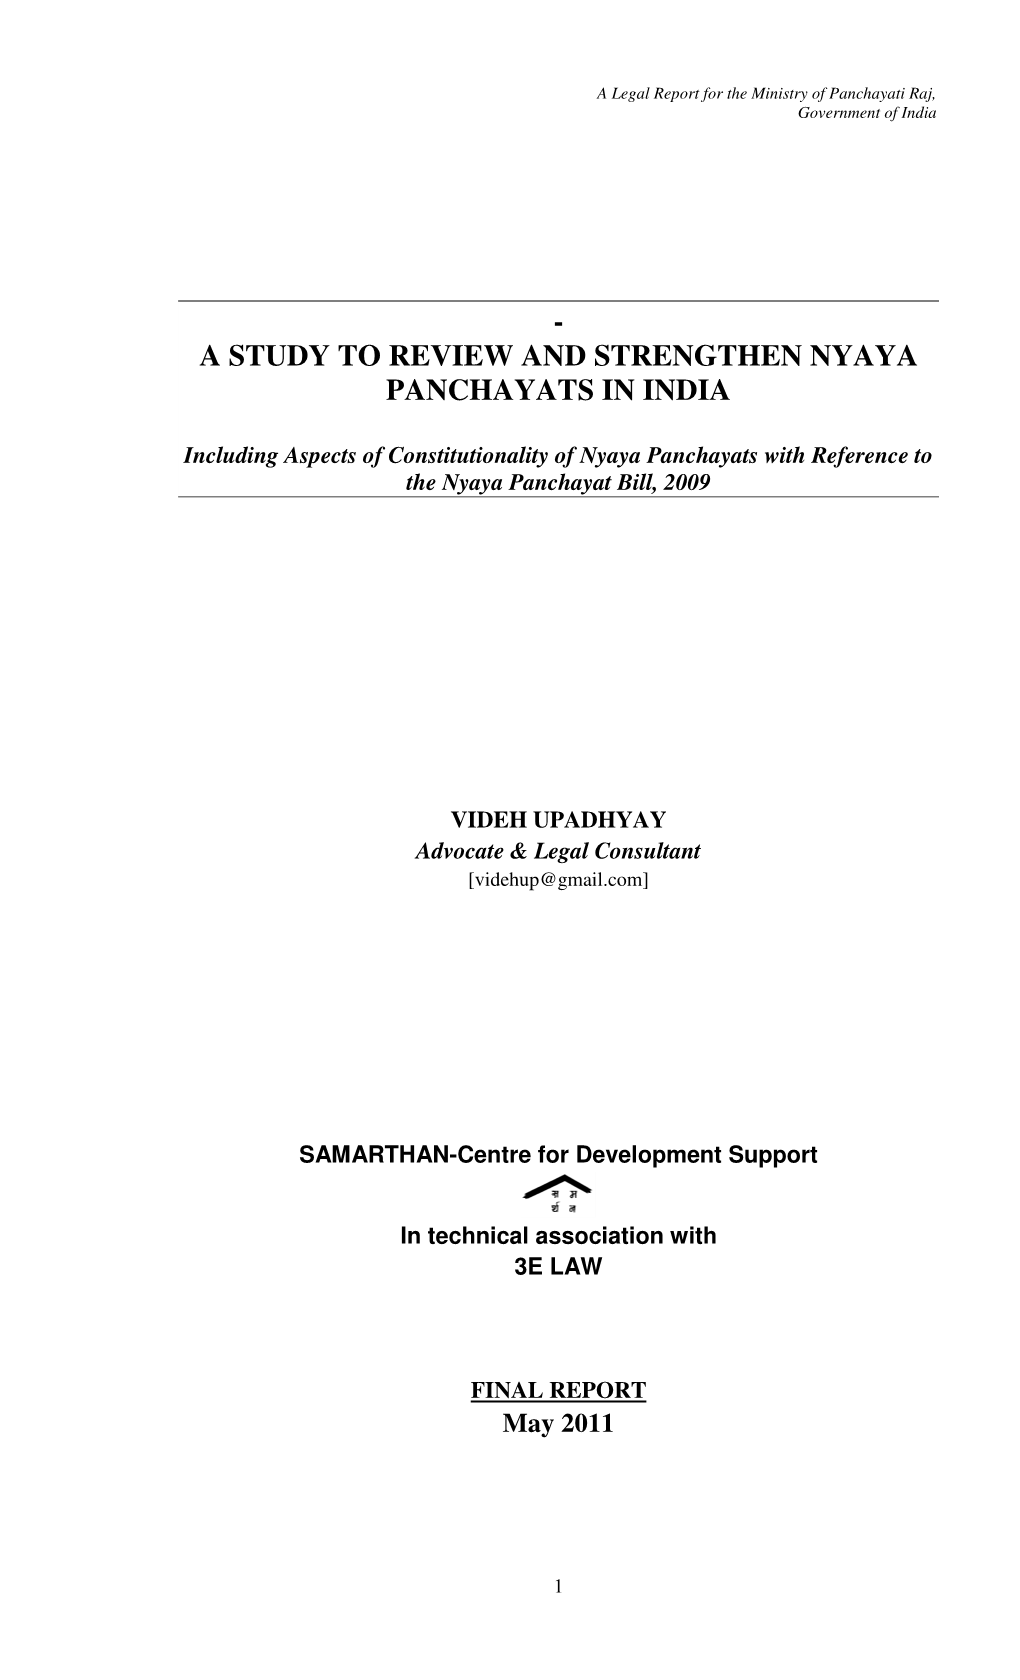 A Study to Review and Strengthen Nyaya Panchayats in India